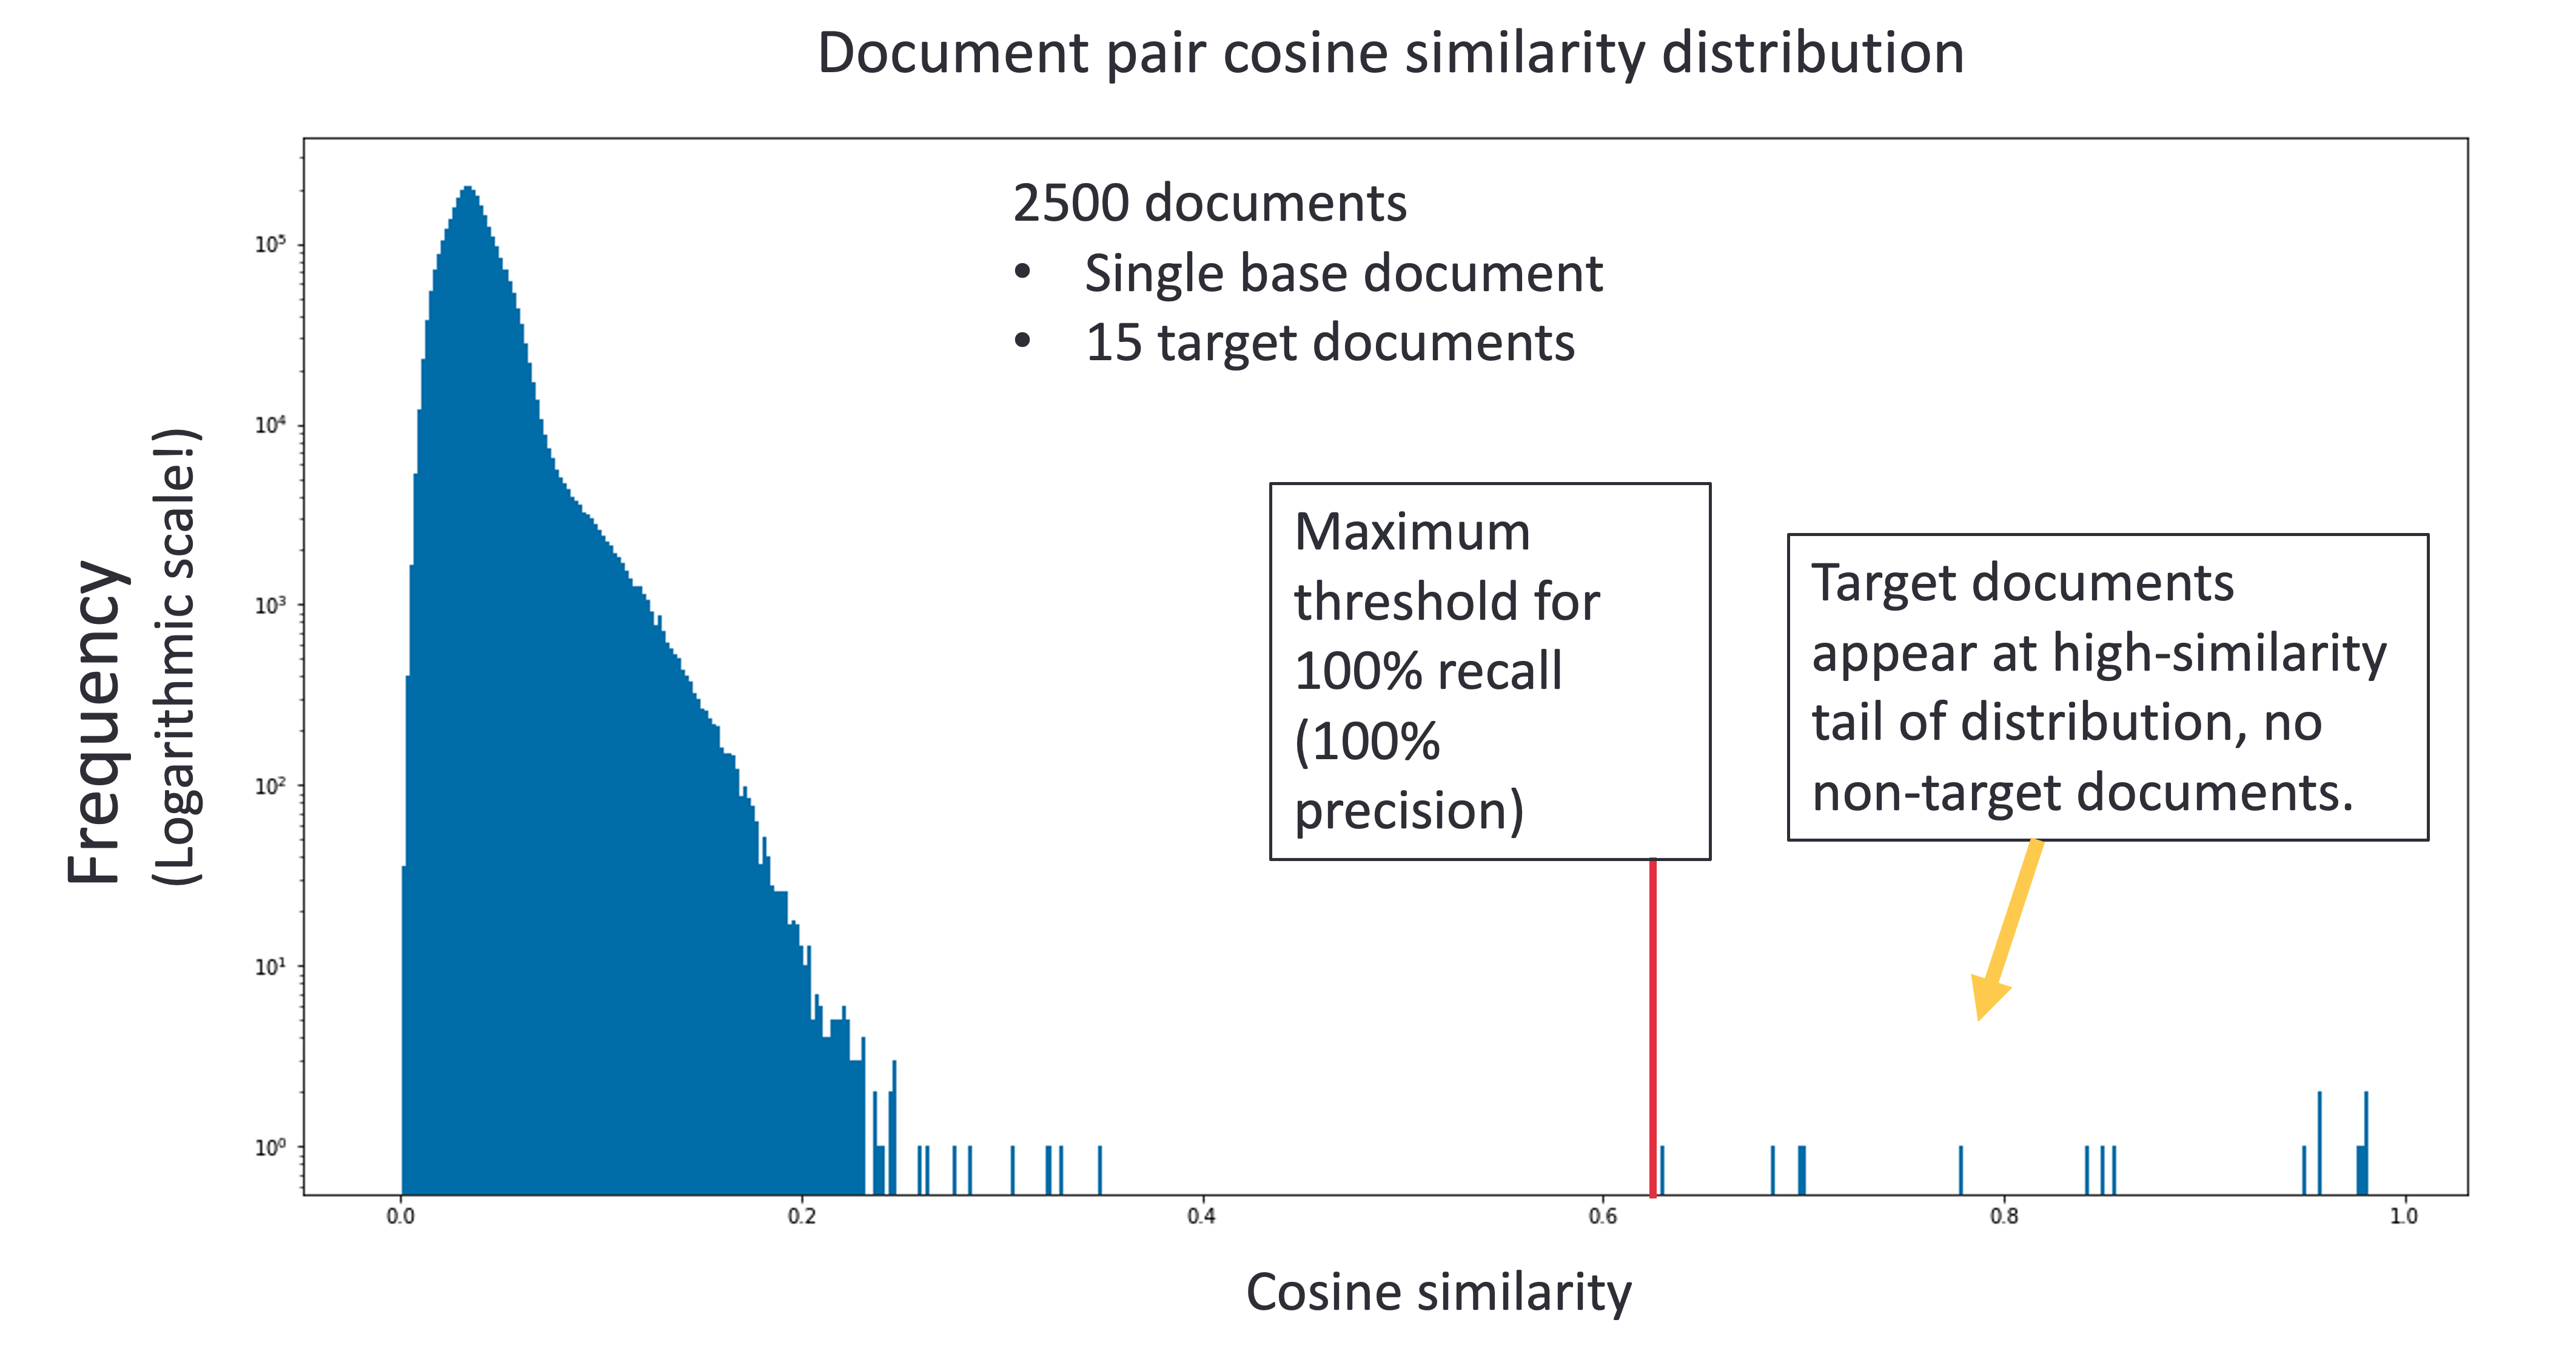 Cosine similarity by frequency, with clear indication of the target documents beyond the tool's configurable threshold